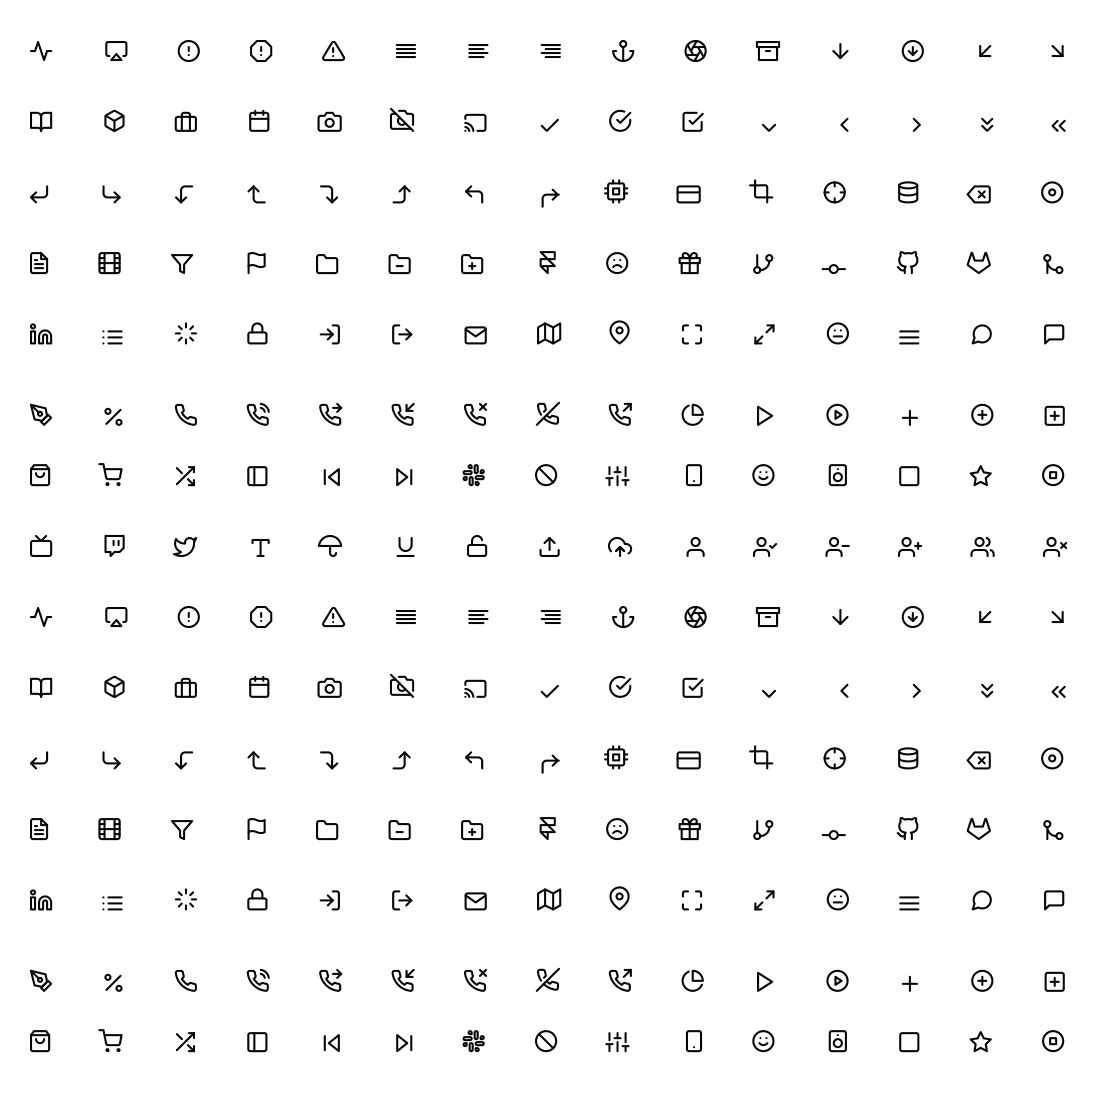 Interface Outline Icon Set cover image.